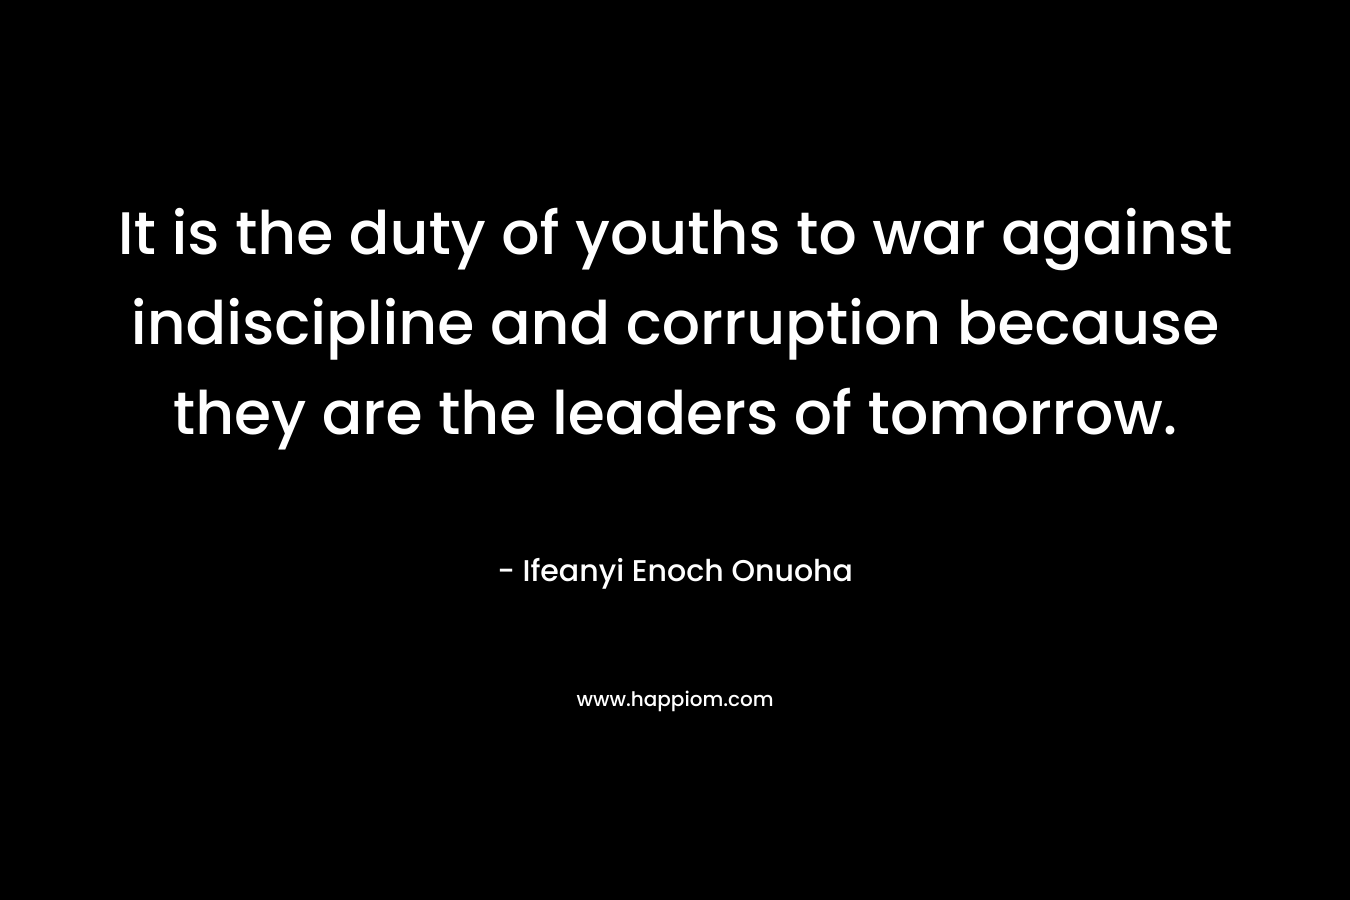 It is the duty of youths to war against indiscipline and corruption because they are the leaders of tomorrow. – Ifeanyi Enoch Onuoha